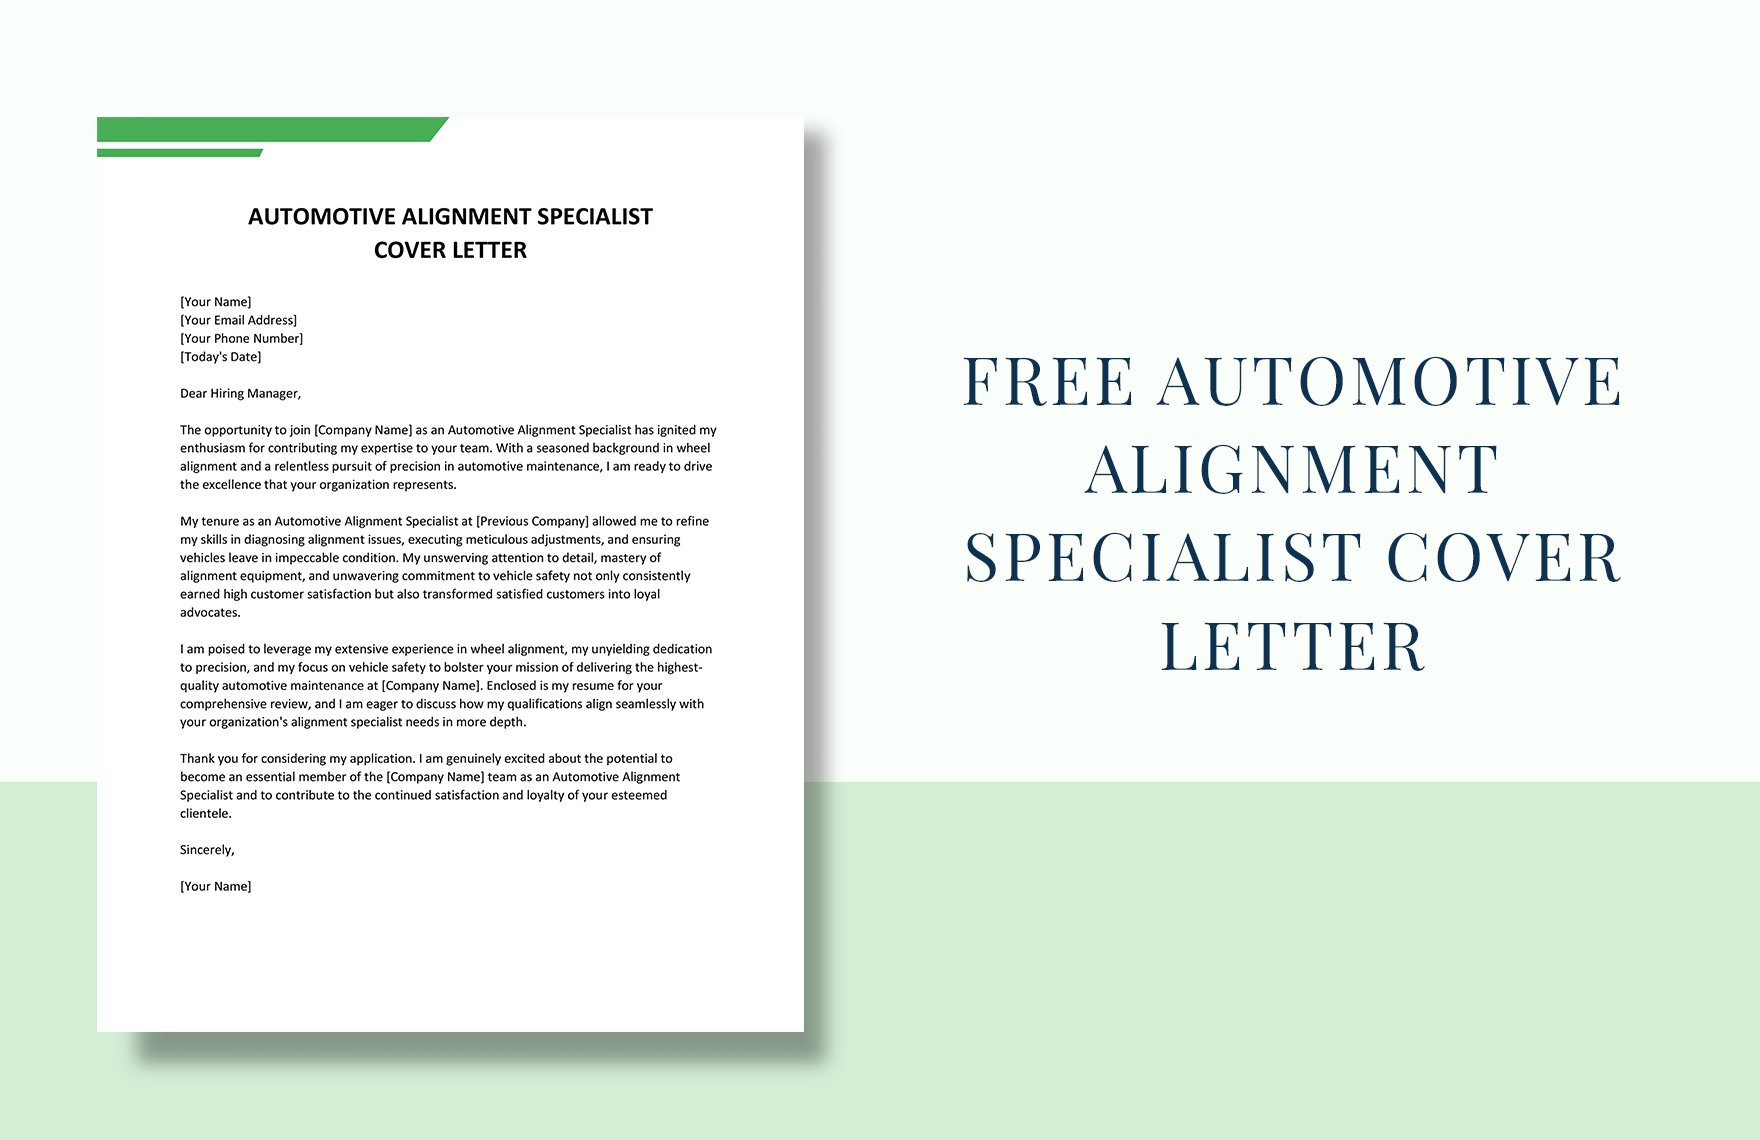 Automotive Alignment Specialist Cover Letter in Word, Google Docs